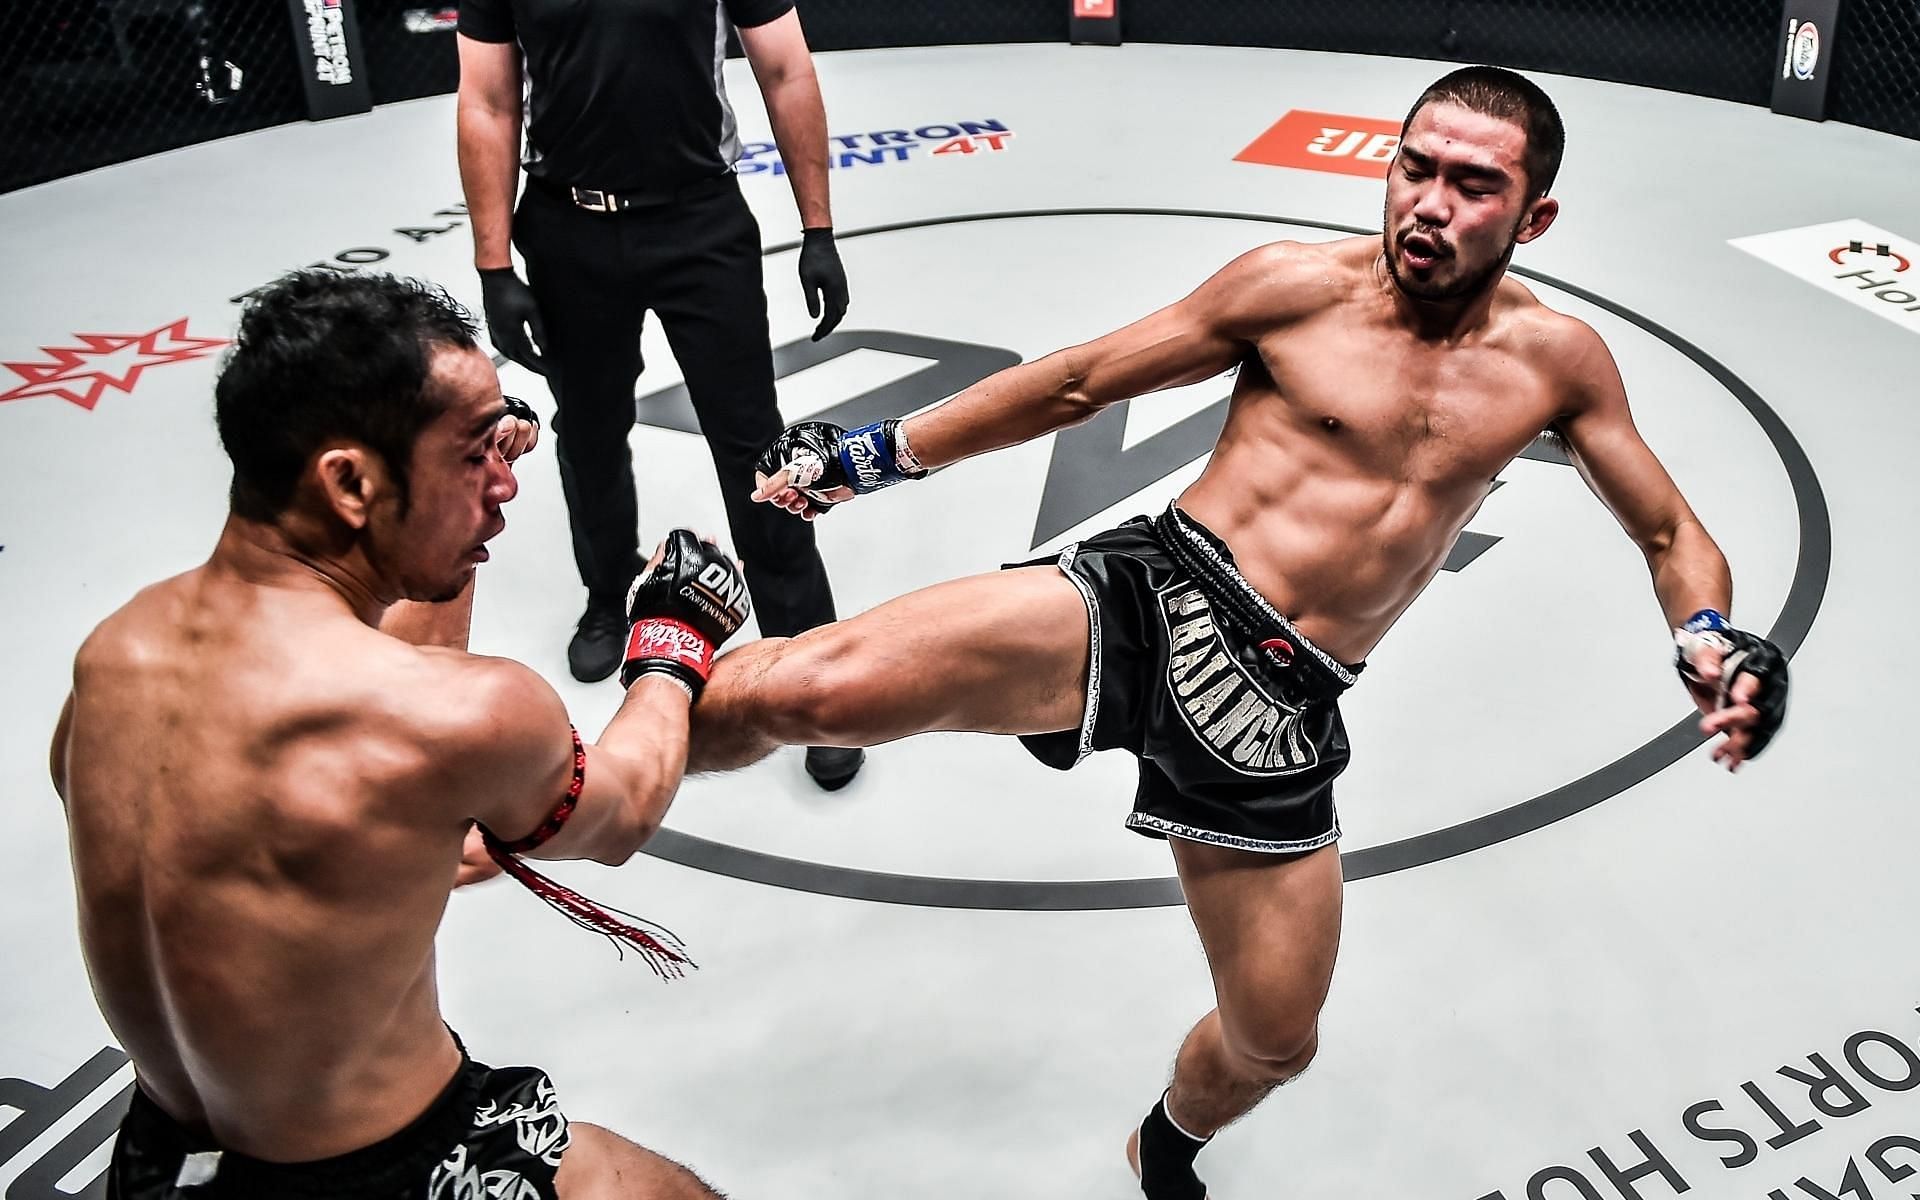 Sam-A Gaiyanghadao (left) and Prajanchai P.K. Saenchaimuaythaigym (right) put on a show back in 2021. (Image courtesy of ONE Championship)